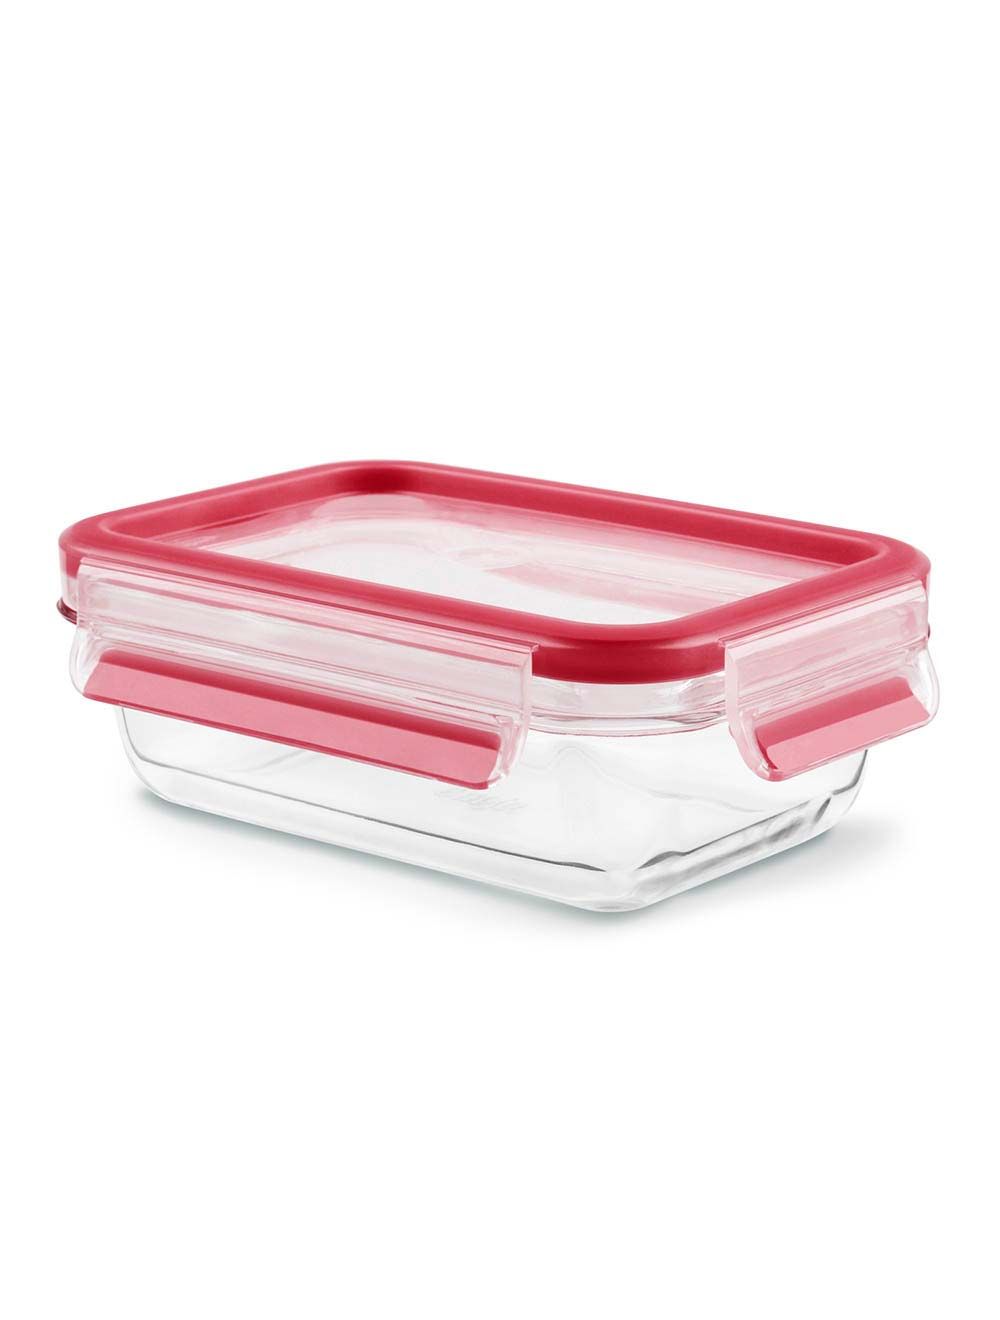 Tefal Masterseal 0.9 L Food Container, K3010312